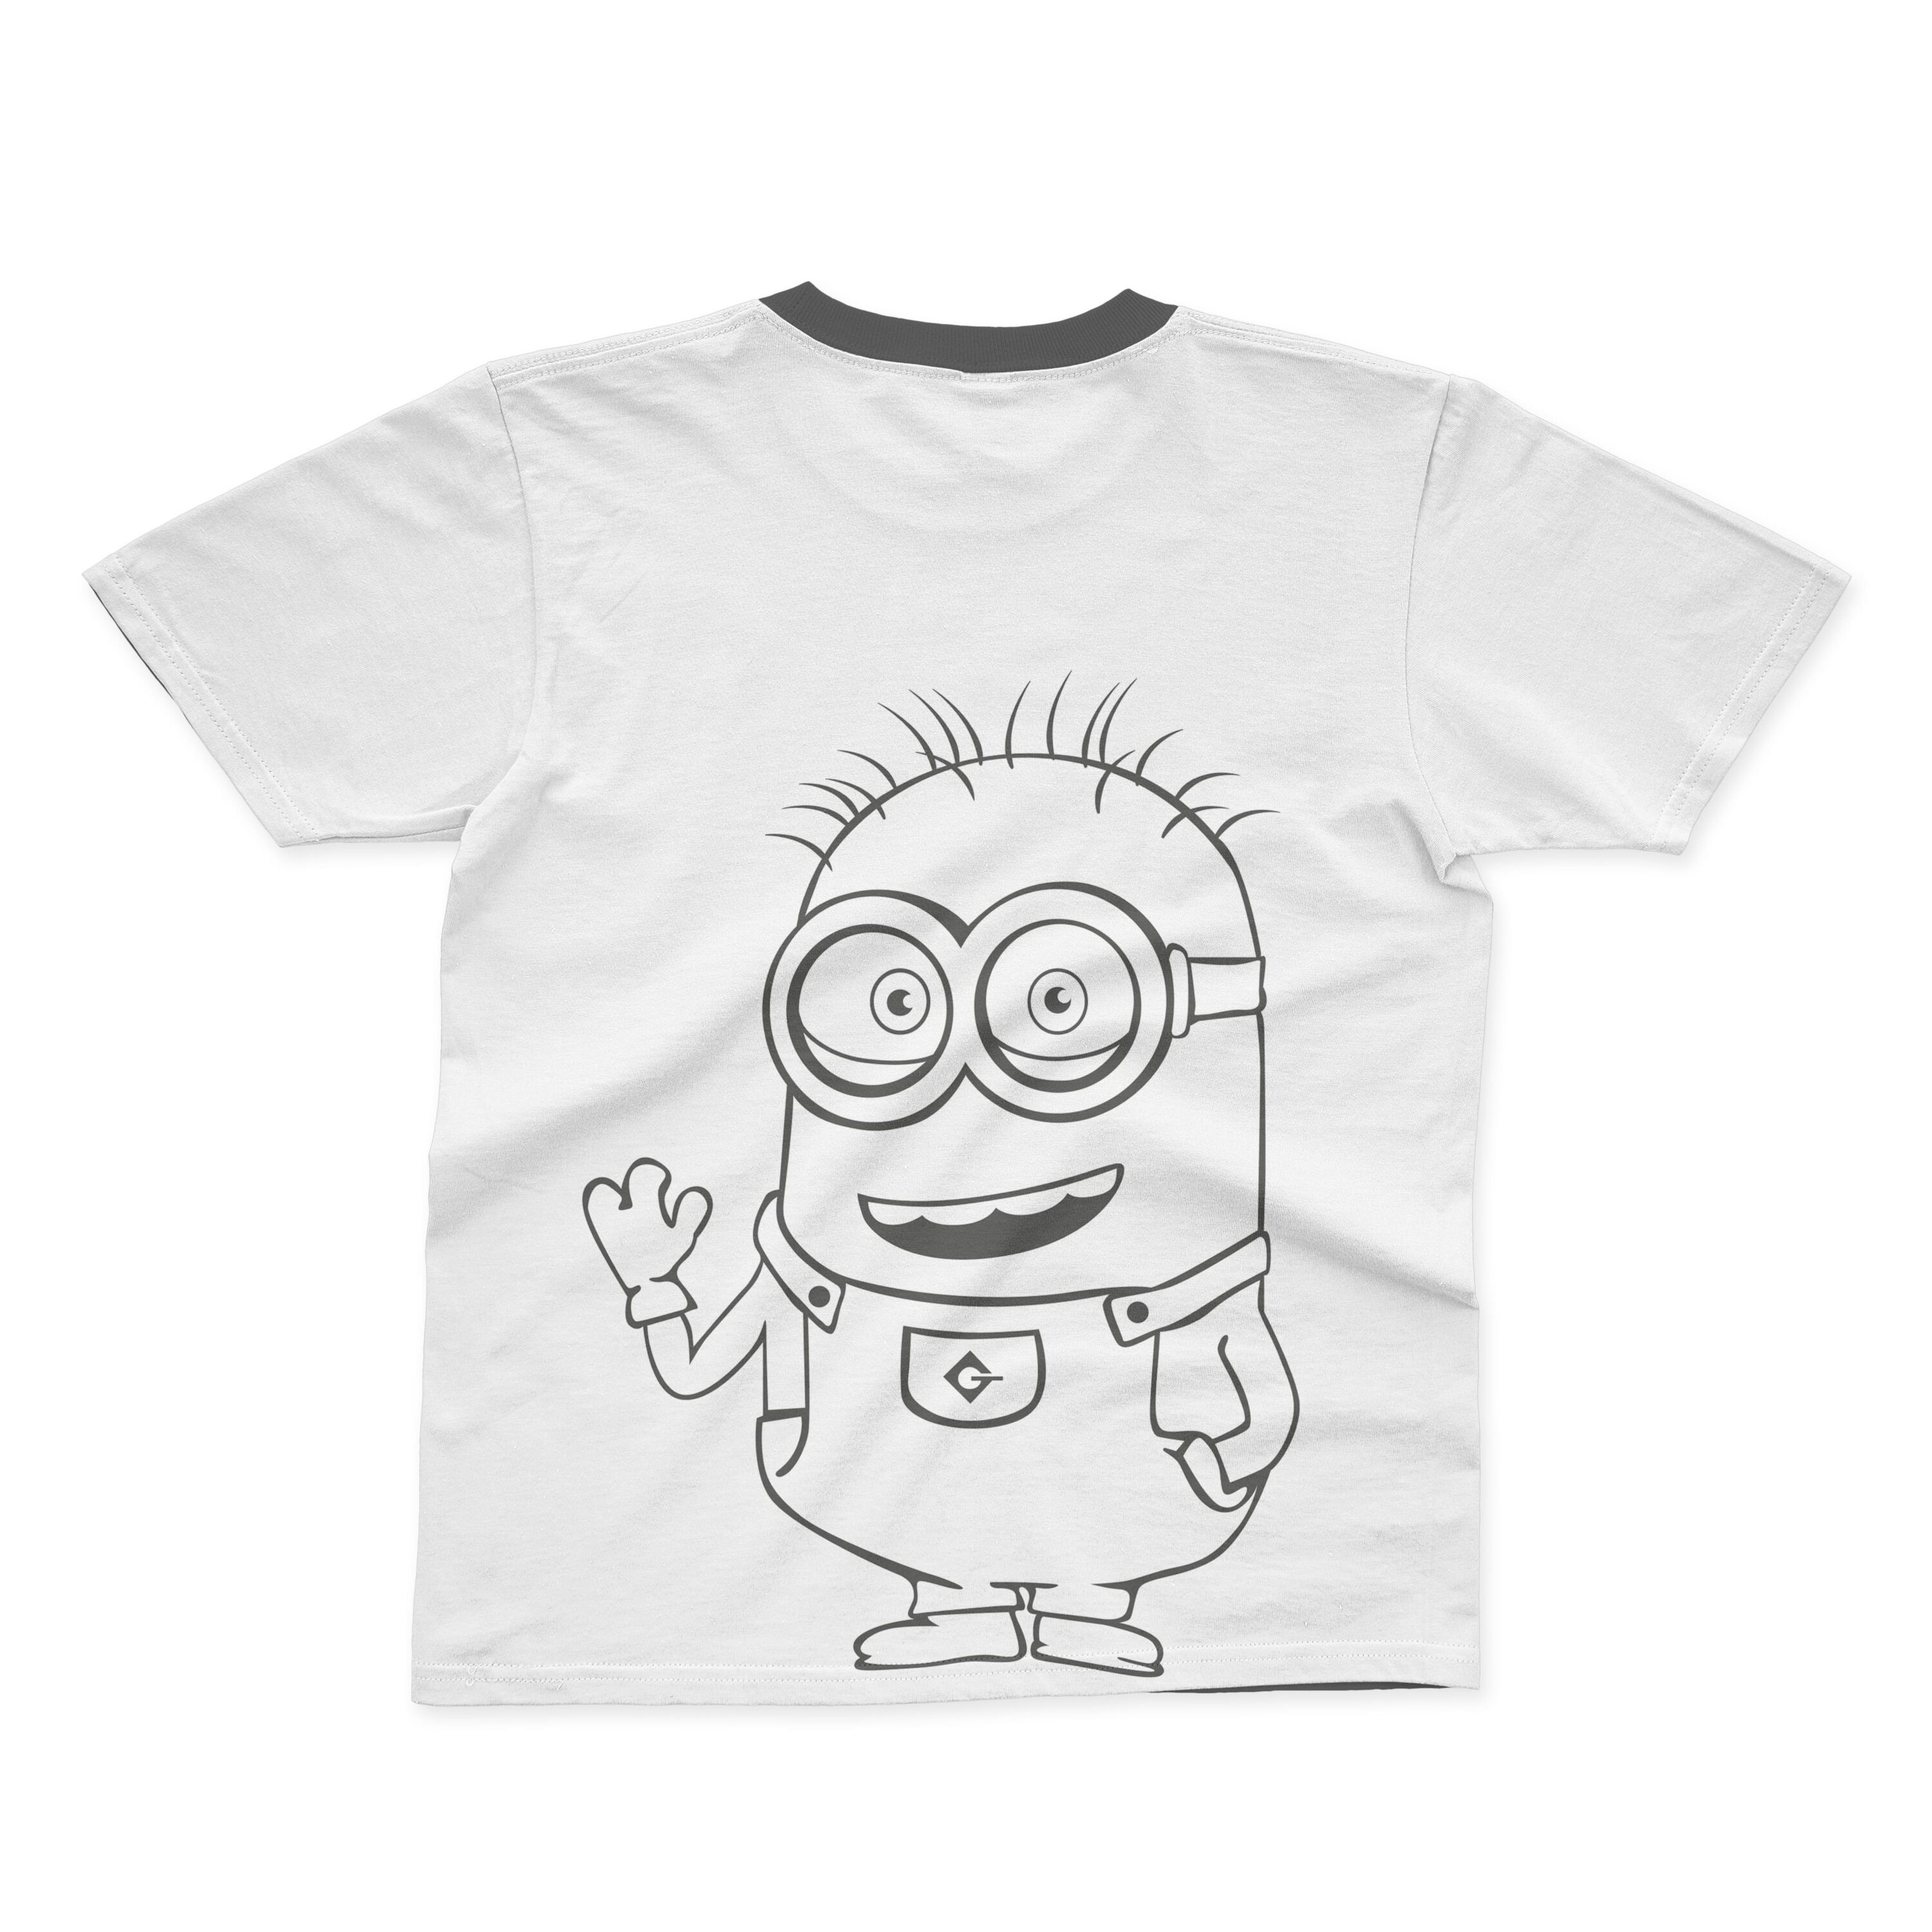 A white T-shirt with a black collar and an outline of a smiling minion.